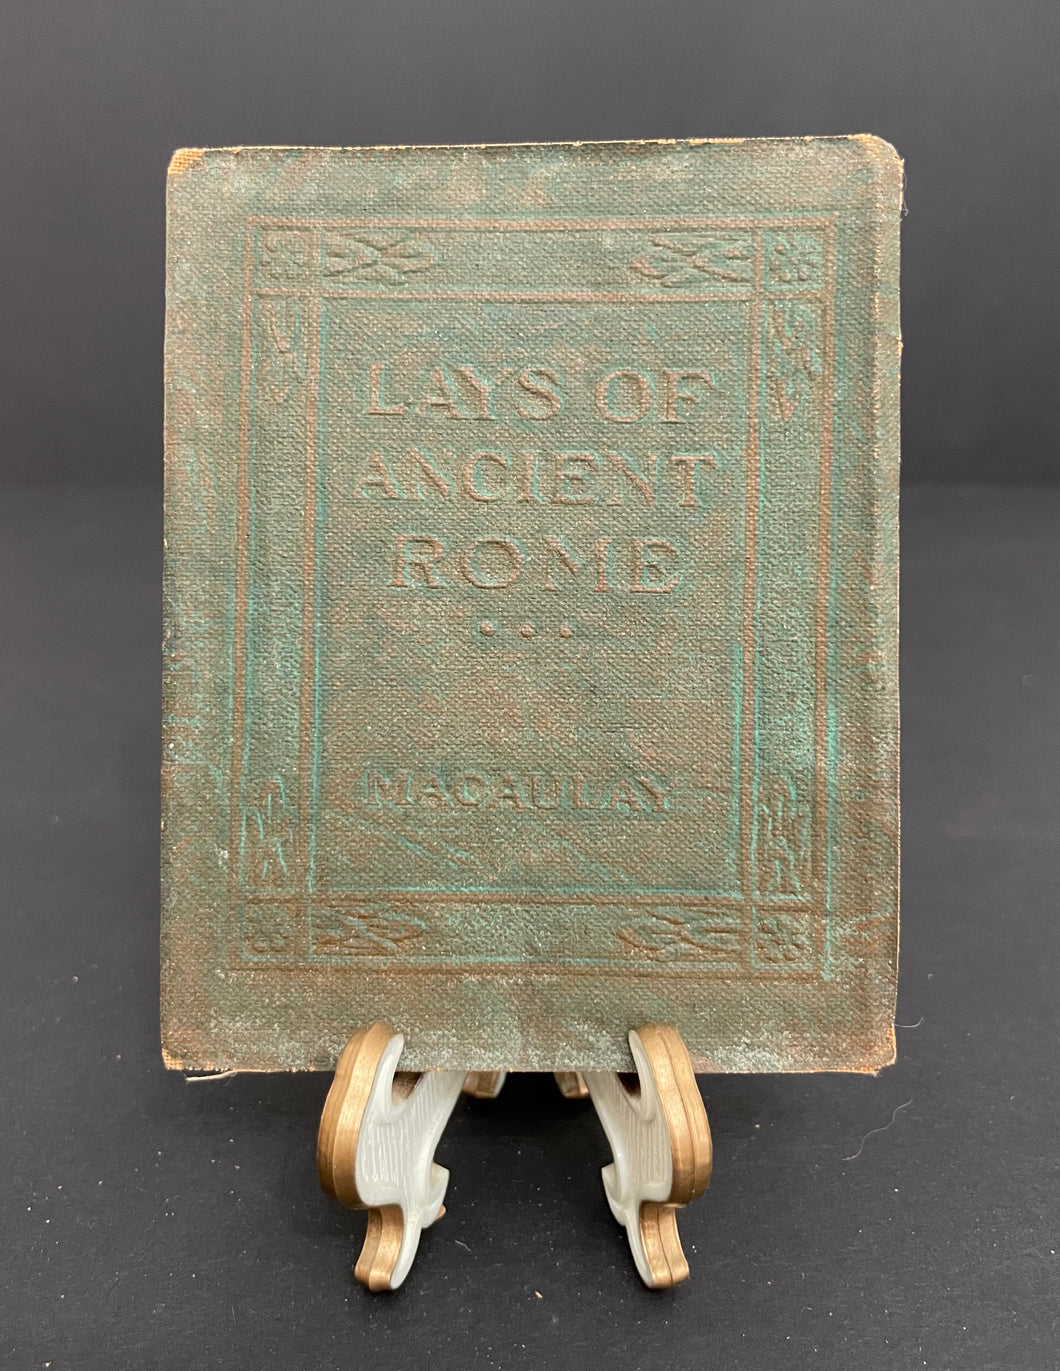 Antique Little Leather Library “Lays of Ancient Rome” by Macaulay Book